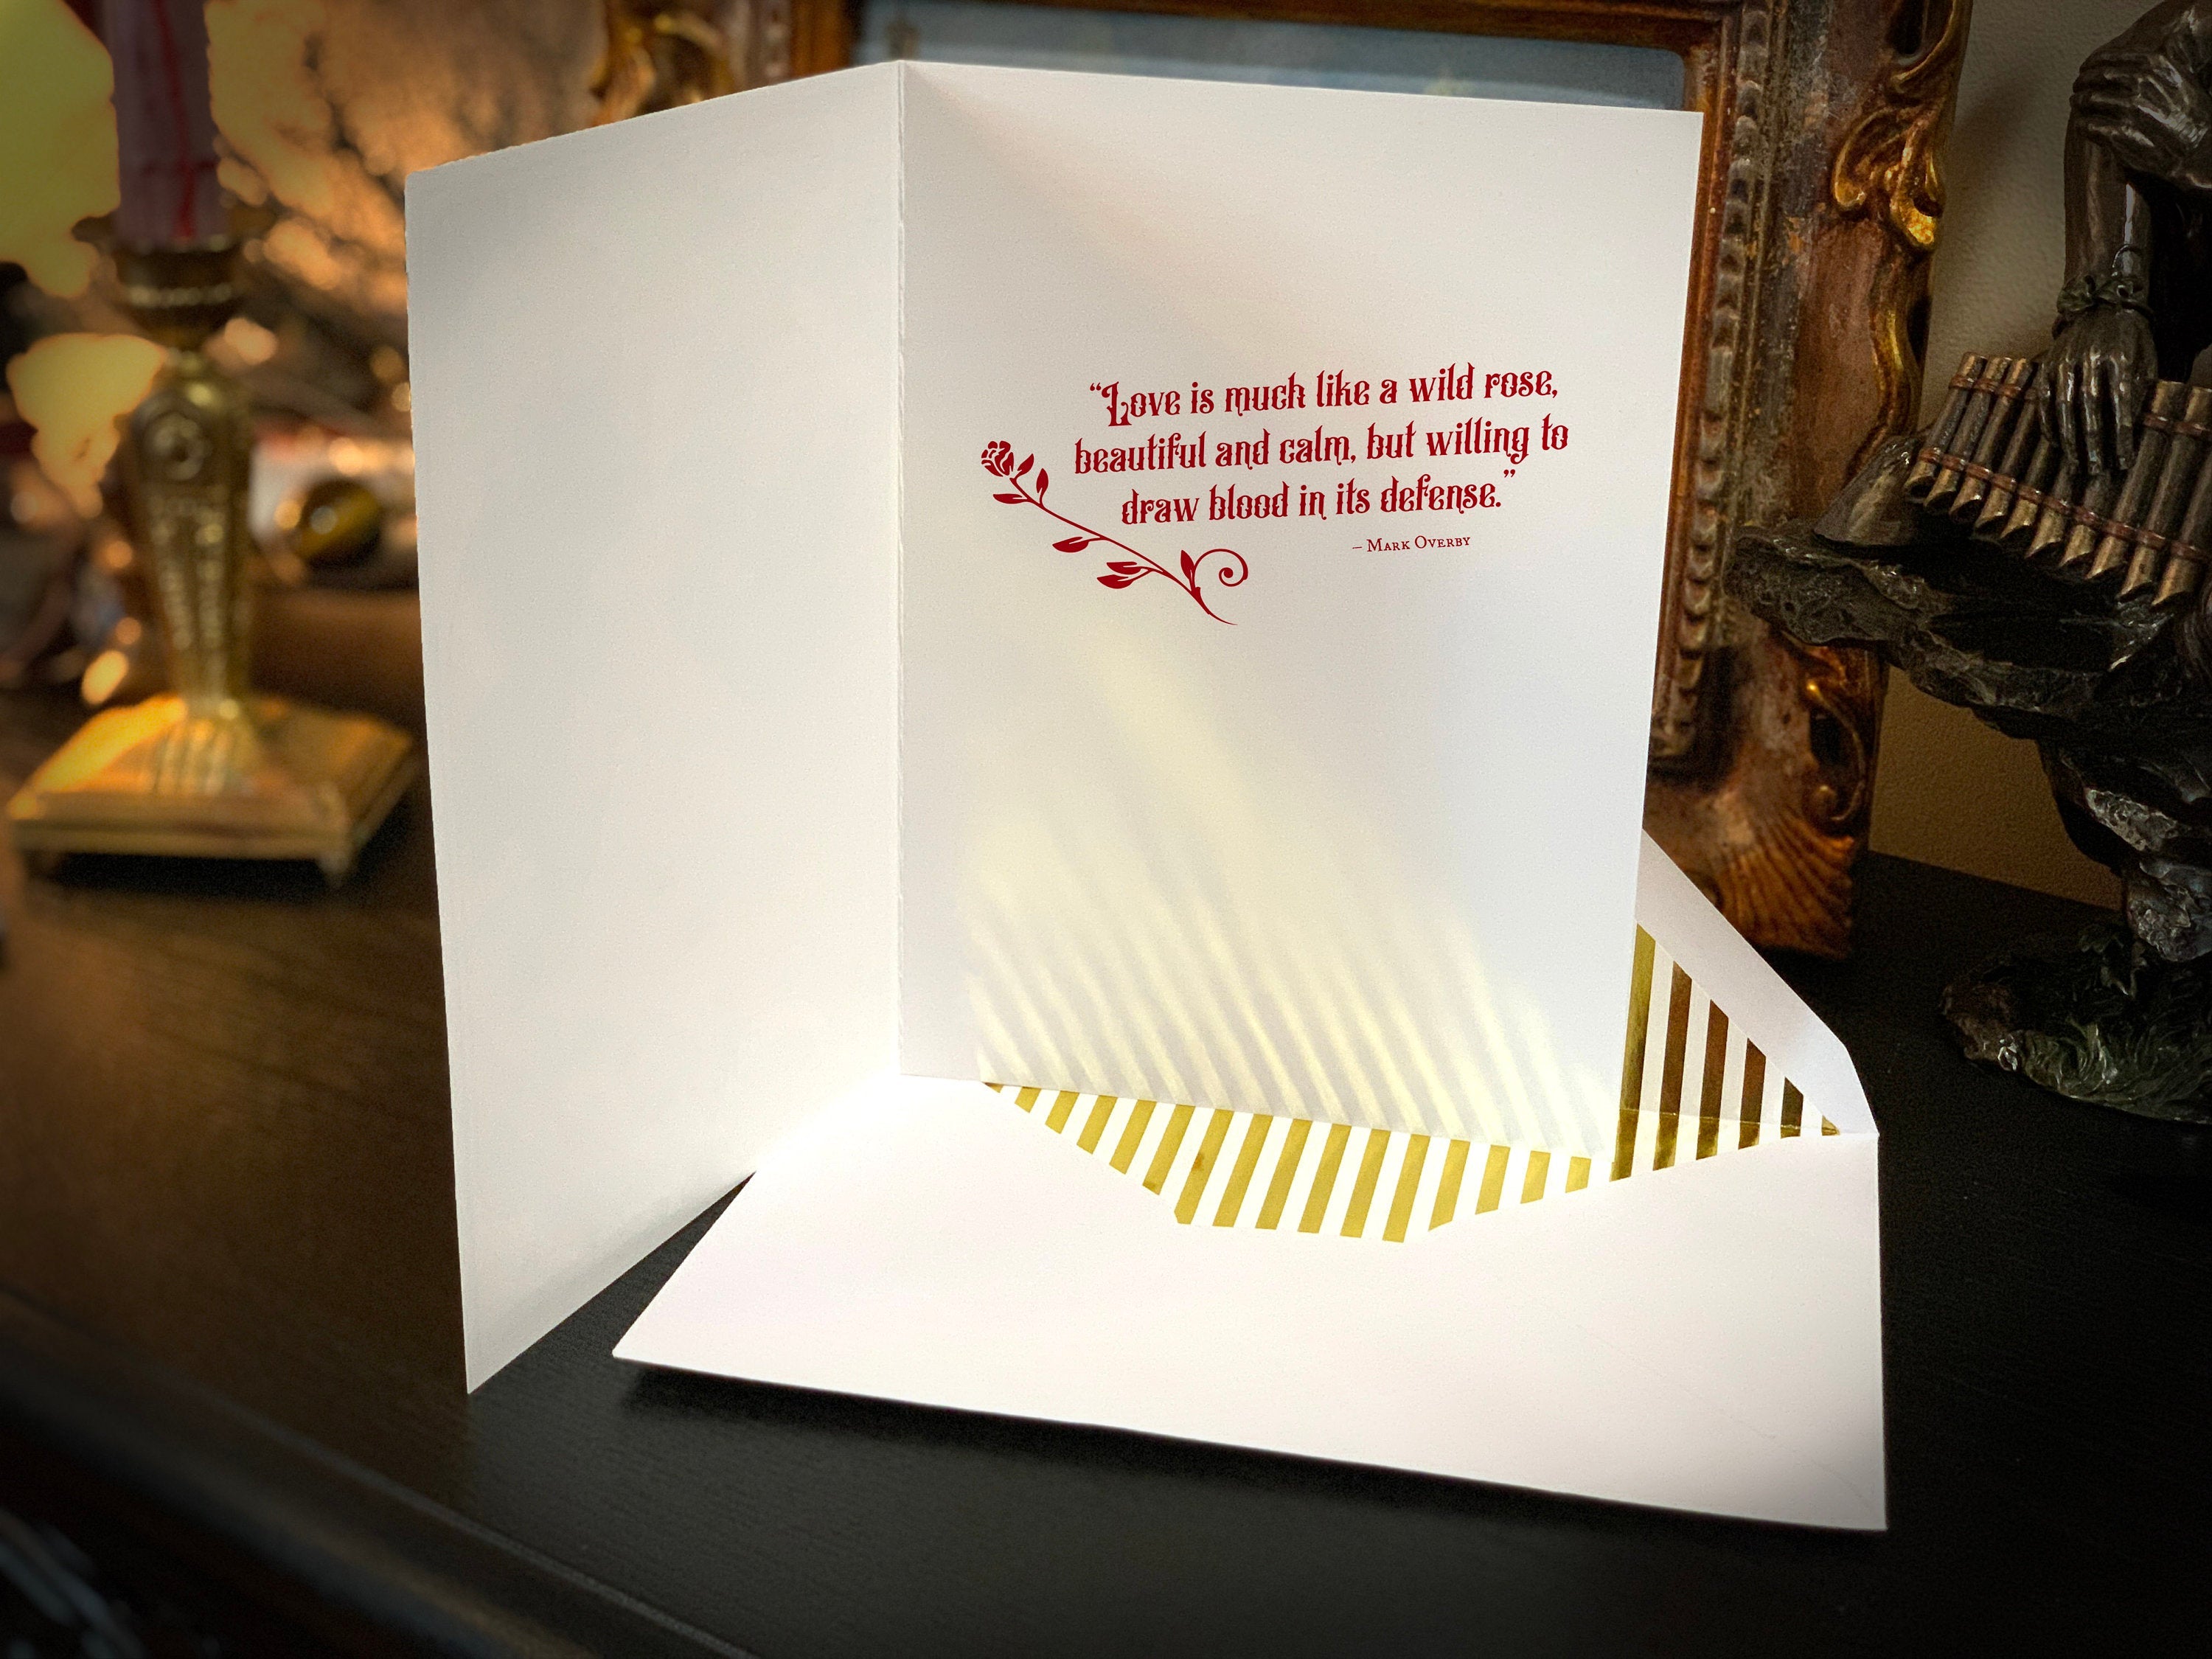 A Thorn Among the Roses, Lesbian Valentine's Day Greeting Card with Gold Foil Envelope, 1 Card/Envelope